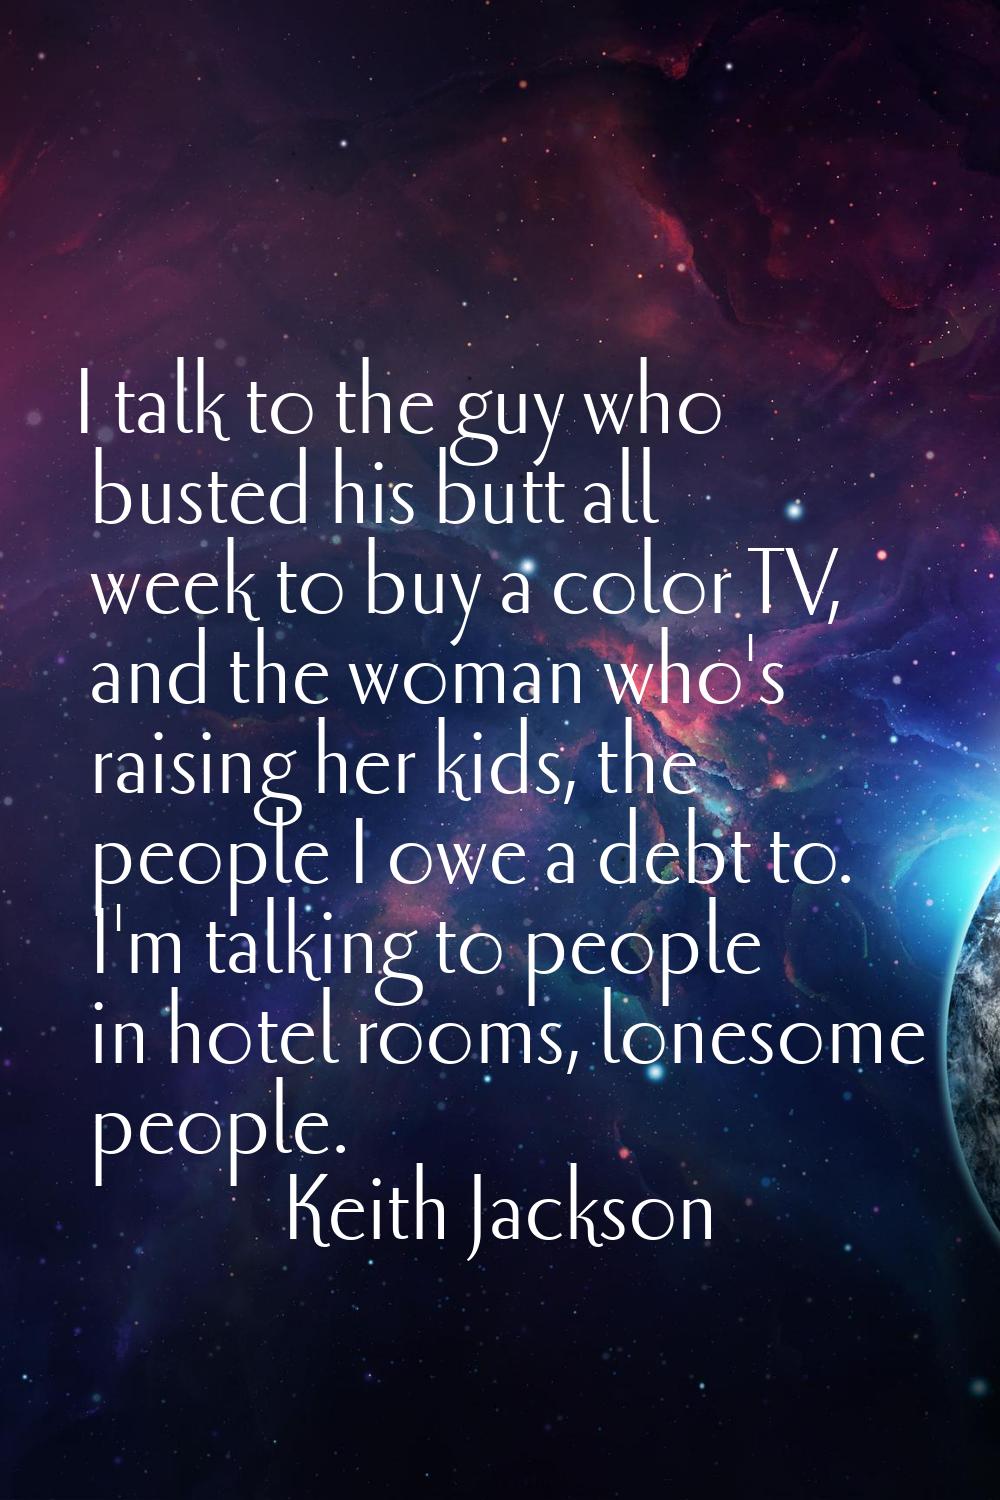 I talk to the guy who busted his butt all week to buy a color TV, and the woman who's raising her k